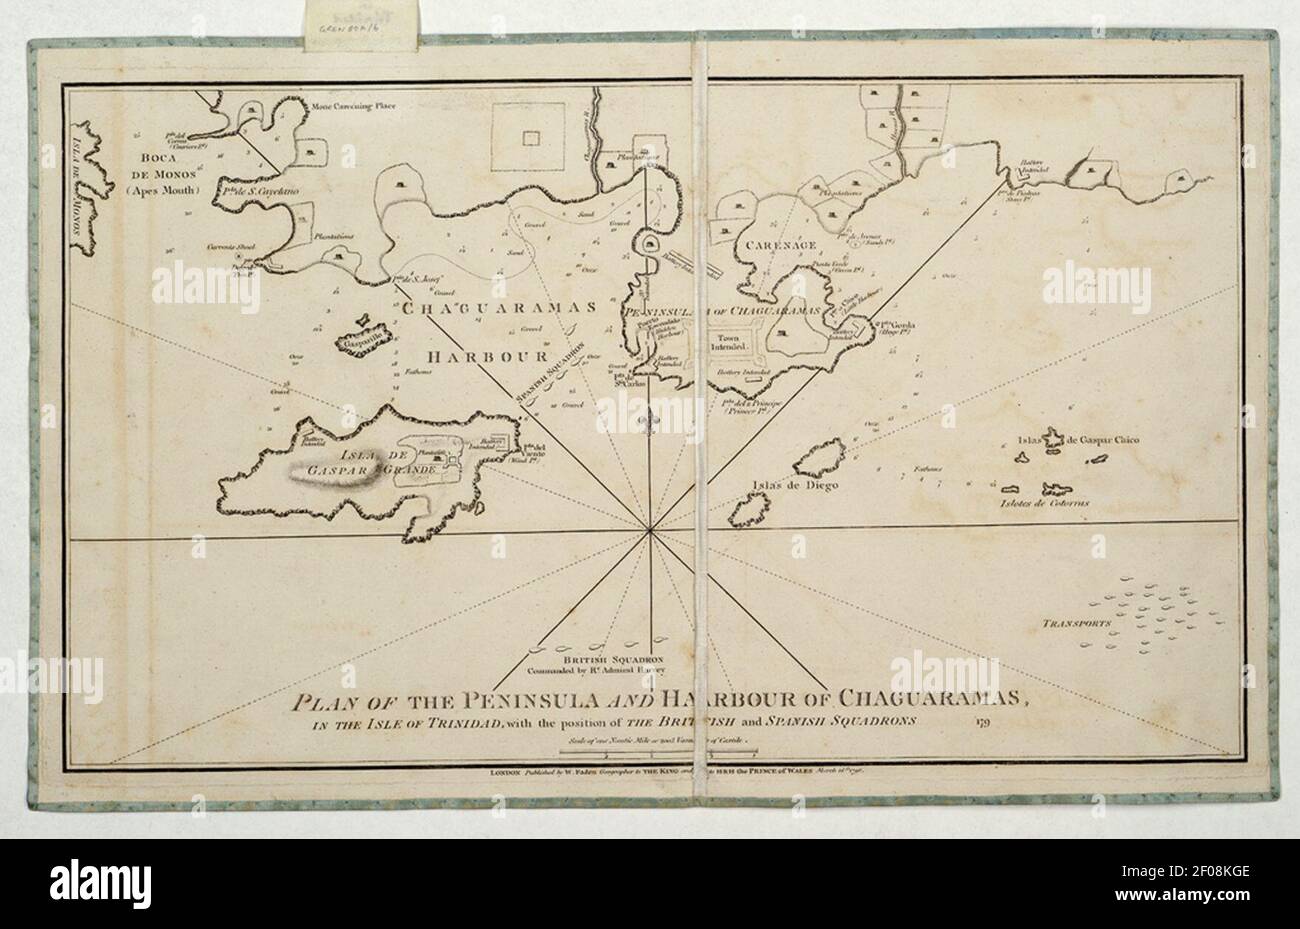 Plan of the peninsula and harbour of Chaguaramas, in the Isle of Trinidad, with the position of the British and Spanish squadrons. Stock Photo